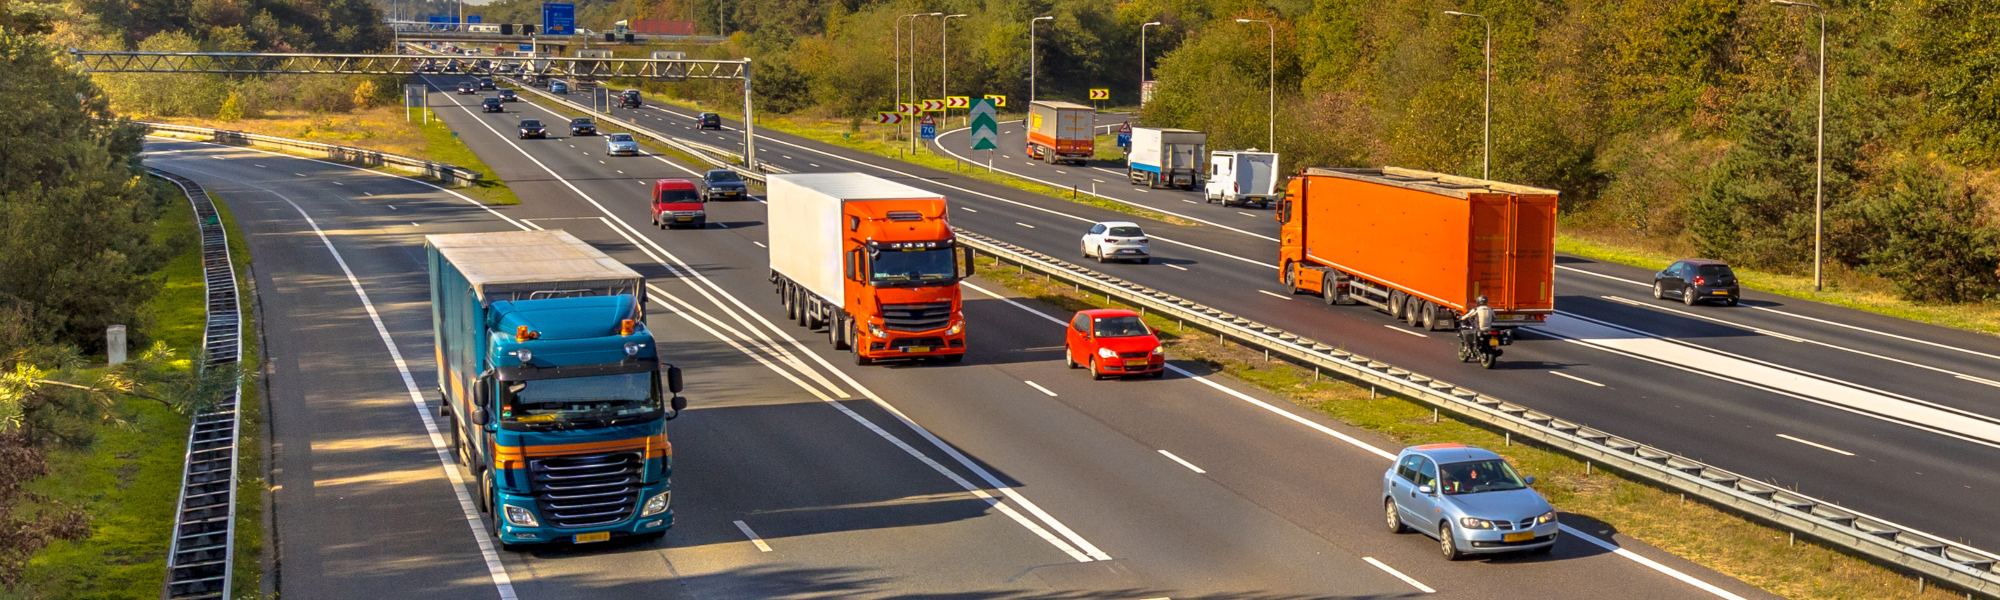 With the EU’s tachograph retrofitting process underway, we caught up with our member Transport en Logistiek Nederland (TLN) to get their perspective on how the industry is dealing with the new devices and where next for this technology.